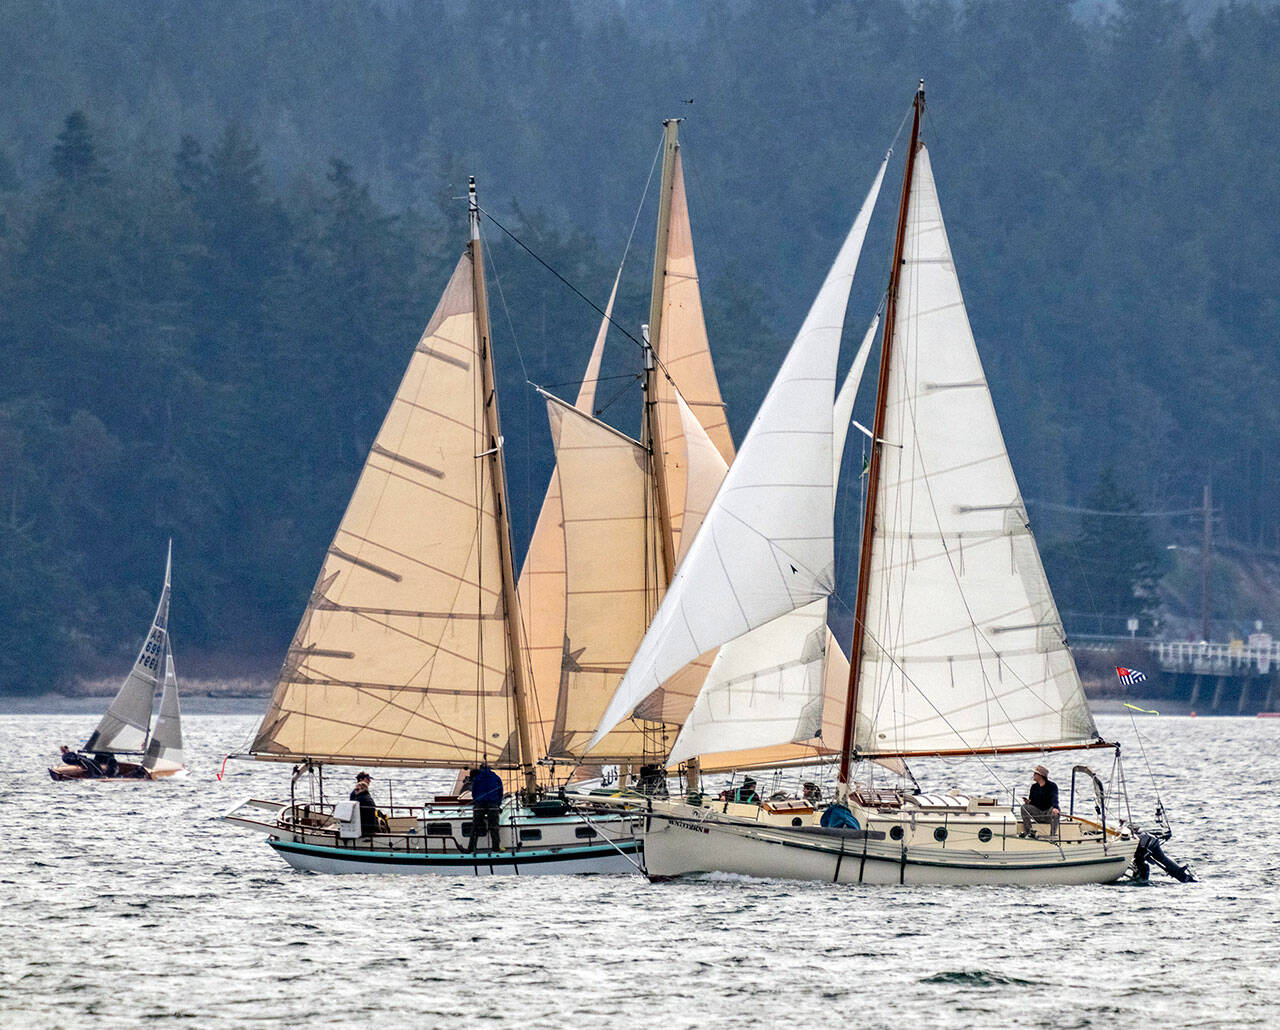 About 30 sailboats compete in the Port Townsend Sailing Association’s 33rd annual Shipwrights Regatta on Port Townsend Bay on Saturday. More of a fun event than a sailing competition, awards are given out during a pizza party afterward for the most navigationally challenged (Directional Helmet trophy) and for the “saltiest” boat and crew. (Steve Mullensky/for Peninsula Daily News)